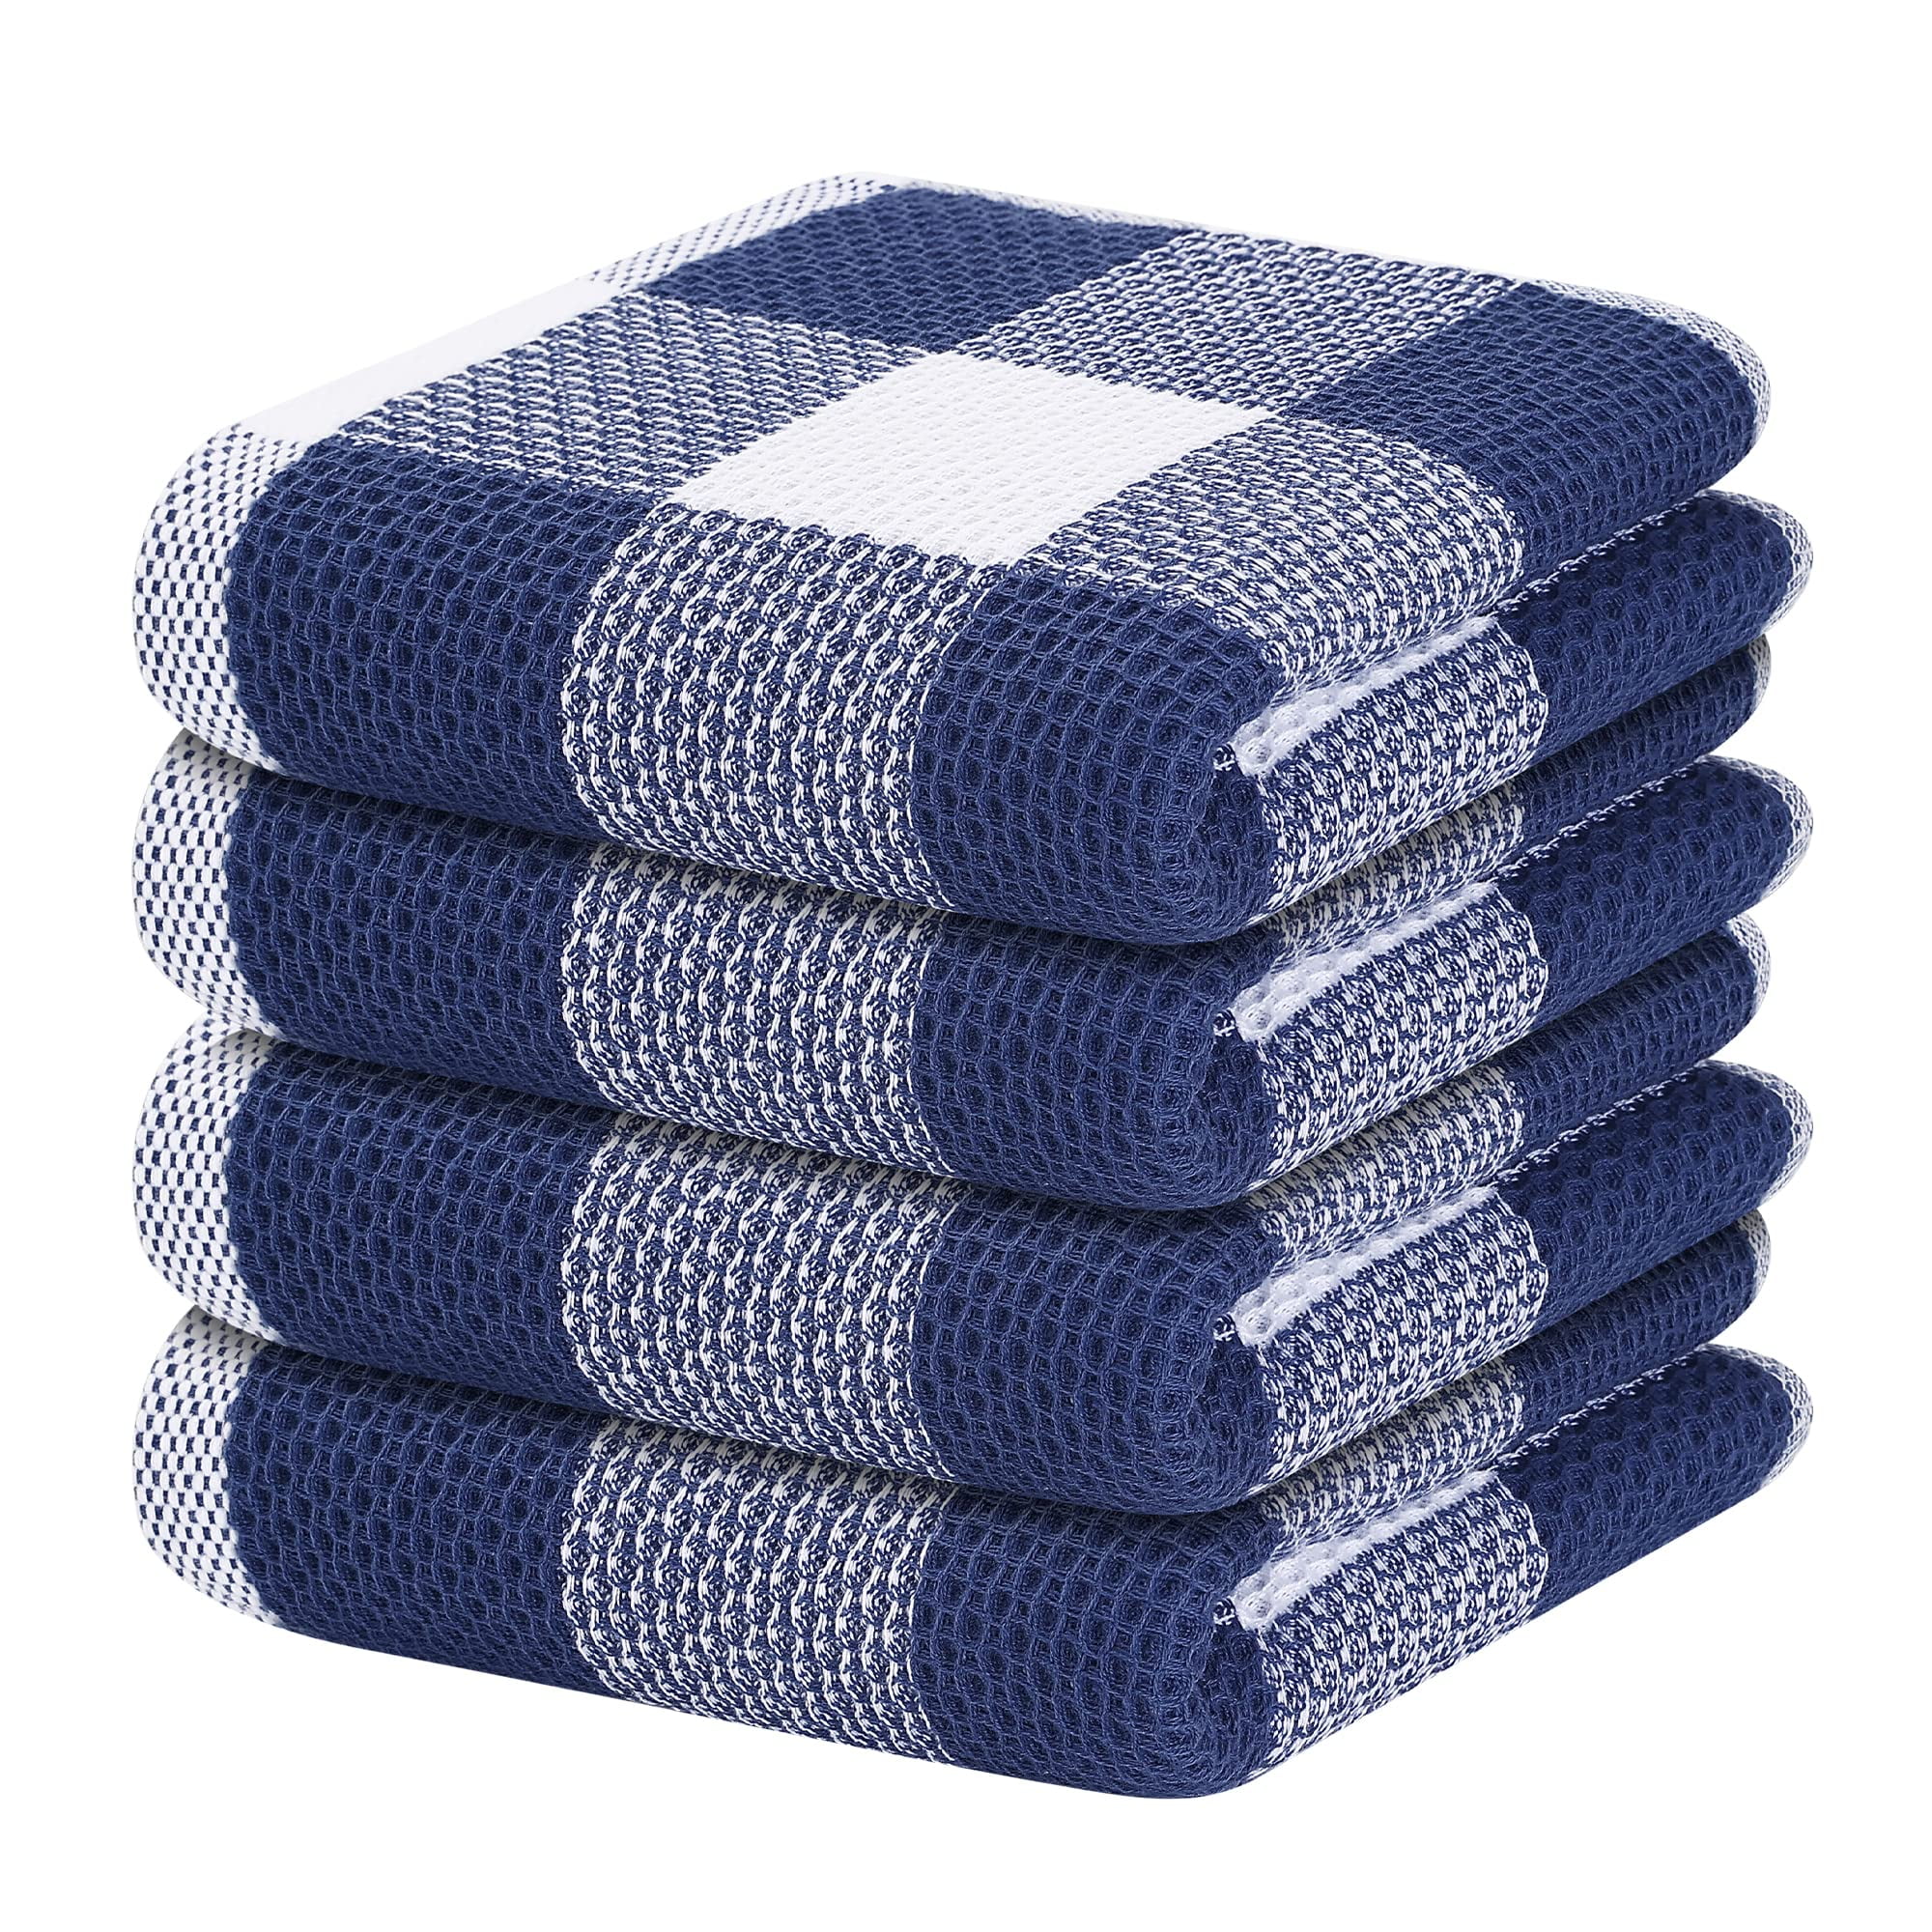 Zulay Kitchen Waffle Weave Dish Towel - 12x12 6 Pack Navy Blue 